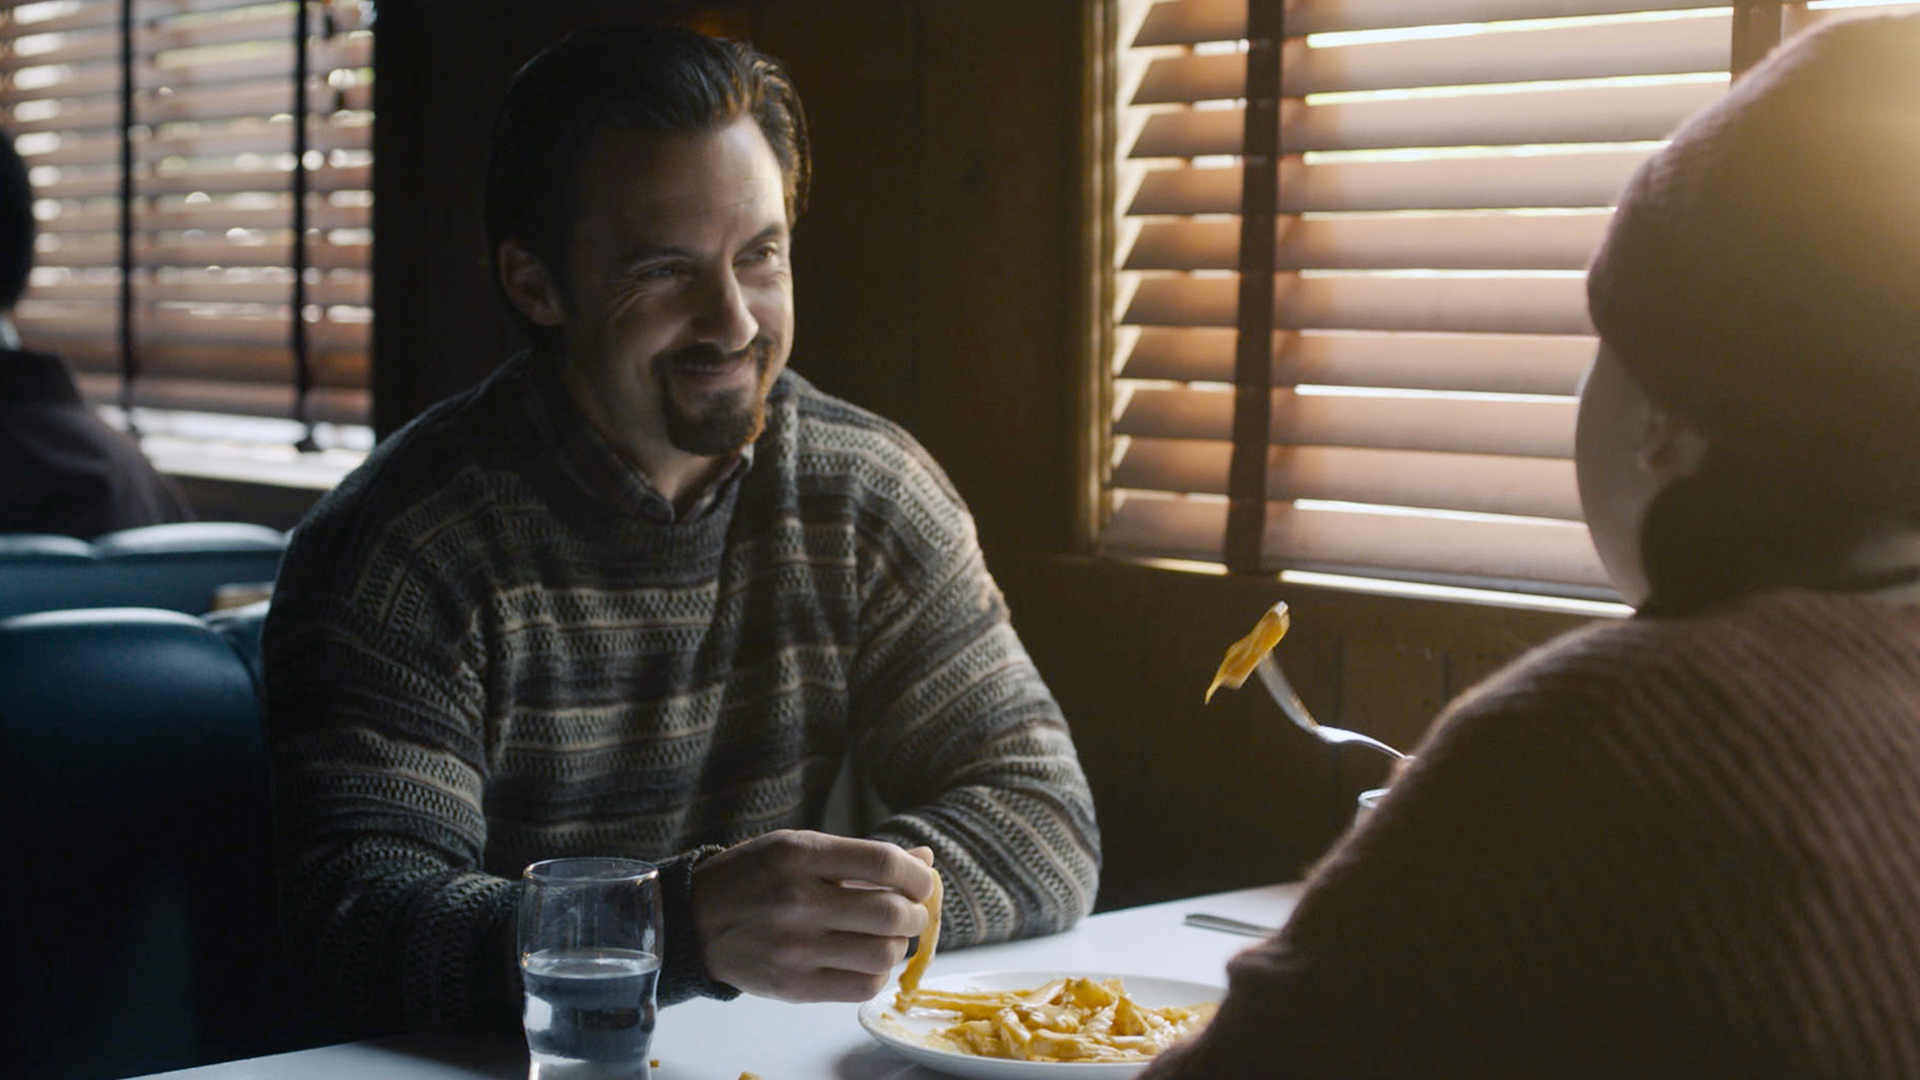 Milo Ventimiglia as Jack and Hannah Zeile as teen Kate eating at a diner in ‘This Is Us’ Season 5 Episode 14